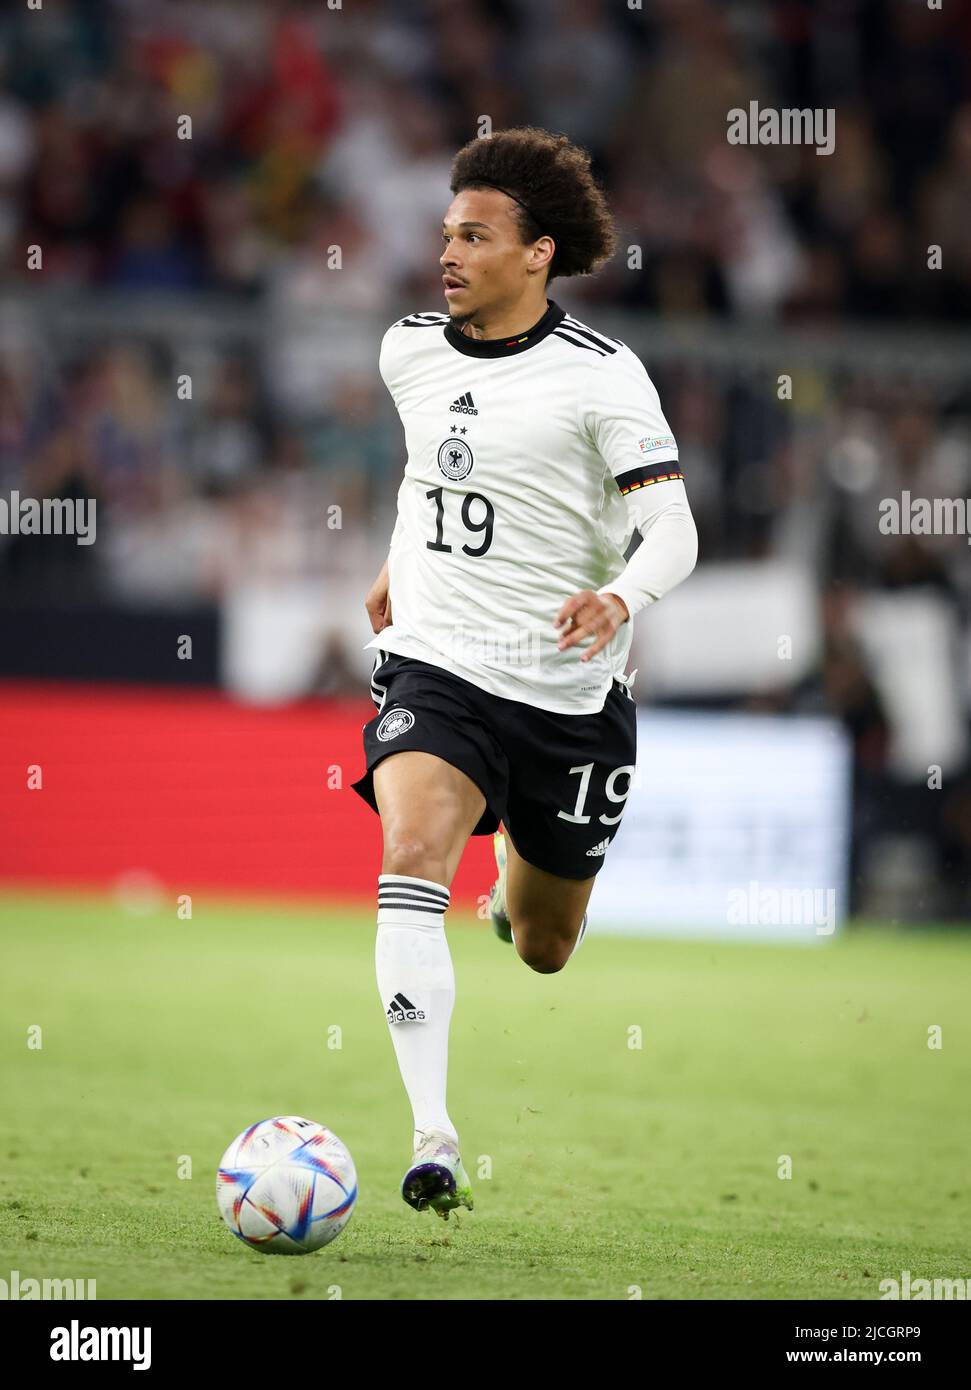 Leroy Sane of Germany  MUNICH, GERMANY - JUNE 07:  UEFA Nations League League A Group 3 match between Germany and England at Allianz Arena on June 07, 2022 in Munich, Germany. Nations League Deutschland England  © diebilderwelt / Alamy Stock Stock Photo